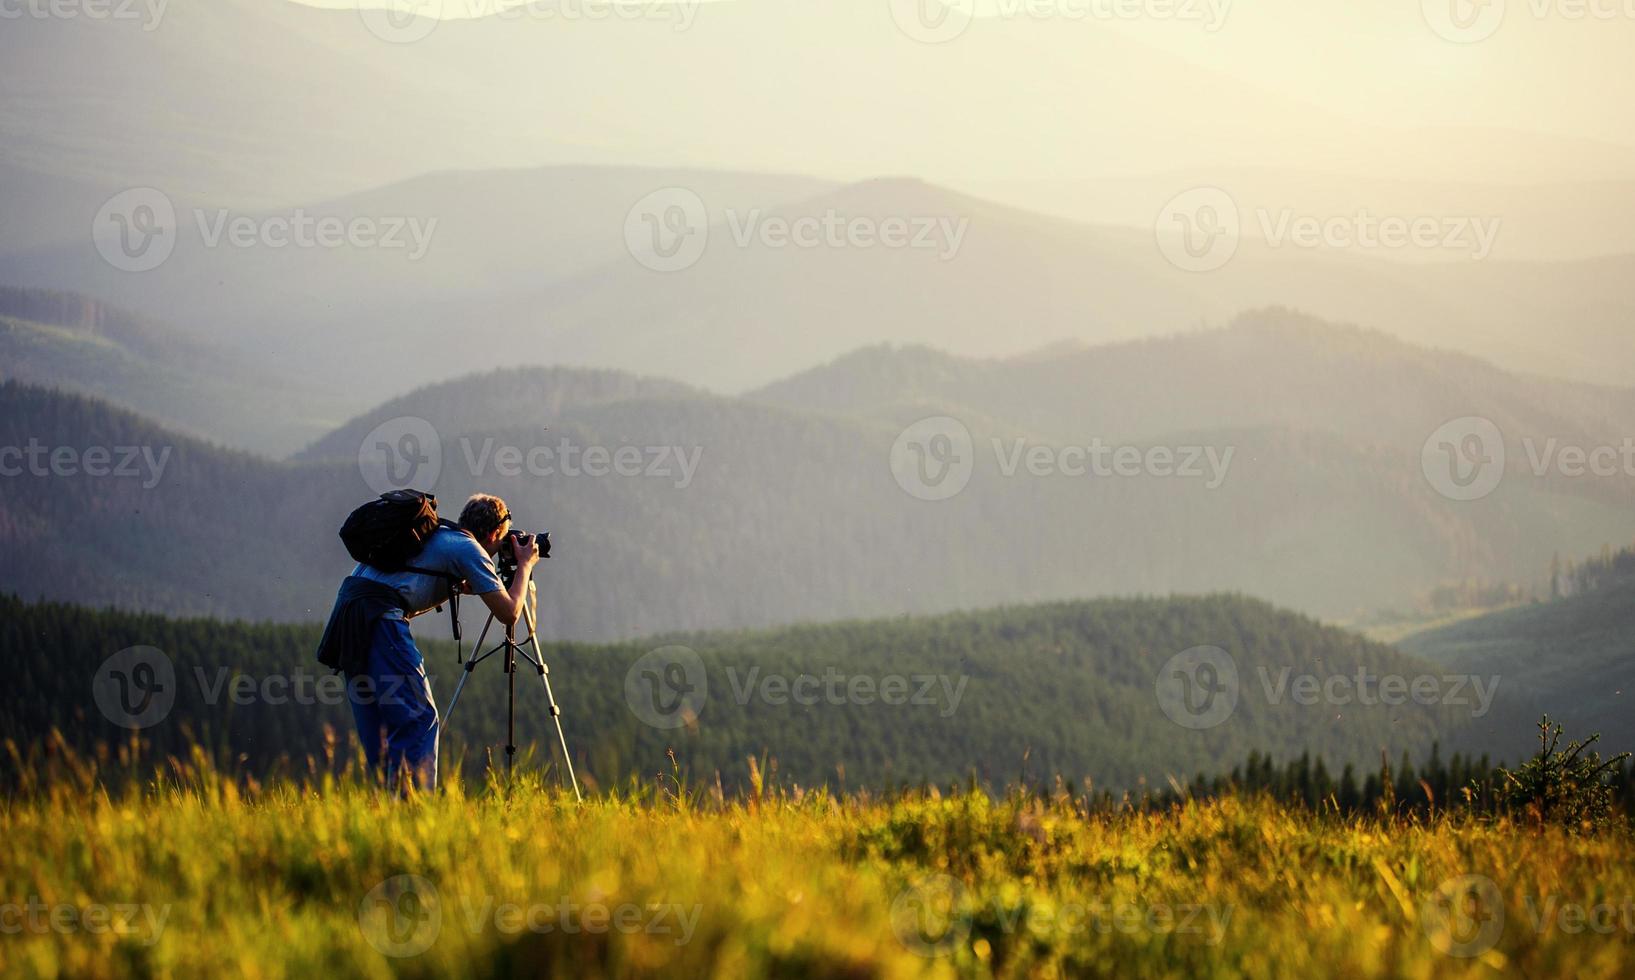 photographer photographed mountains in summer, photographs fog photo